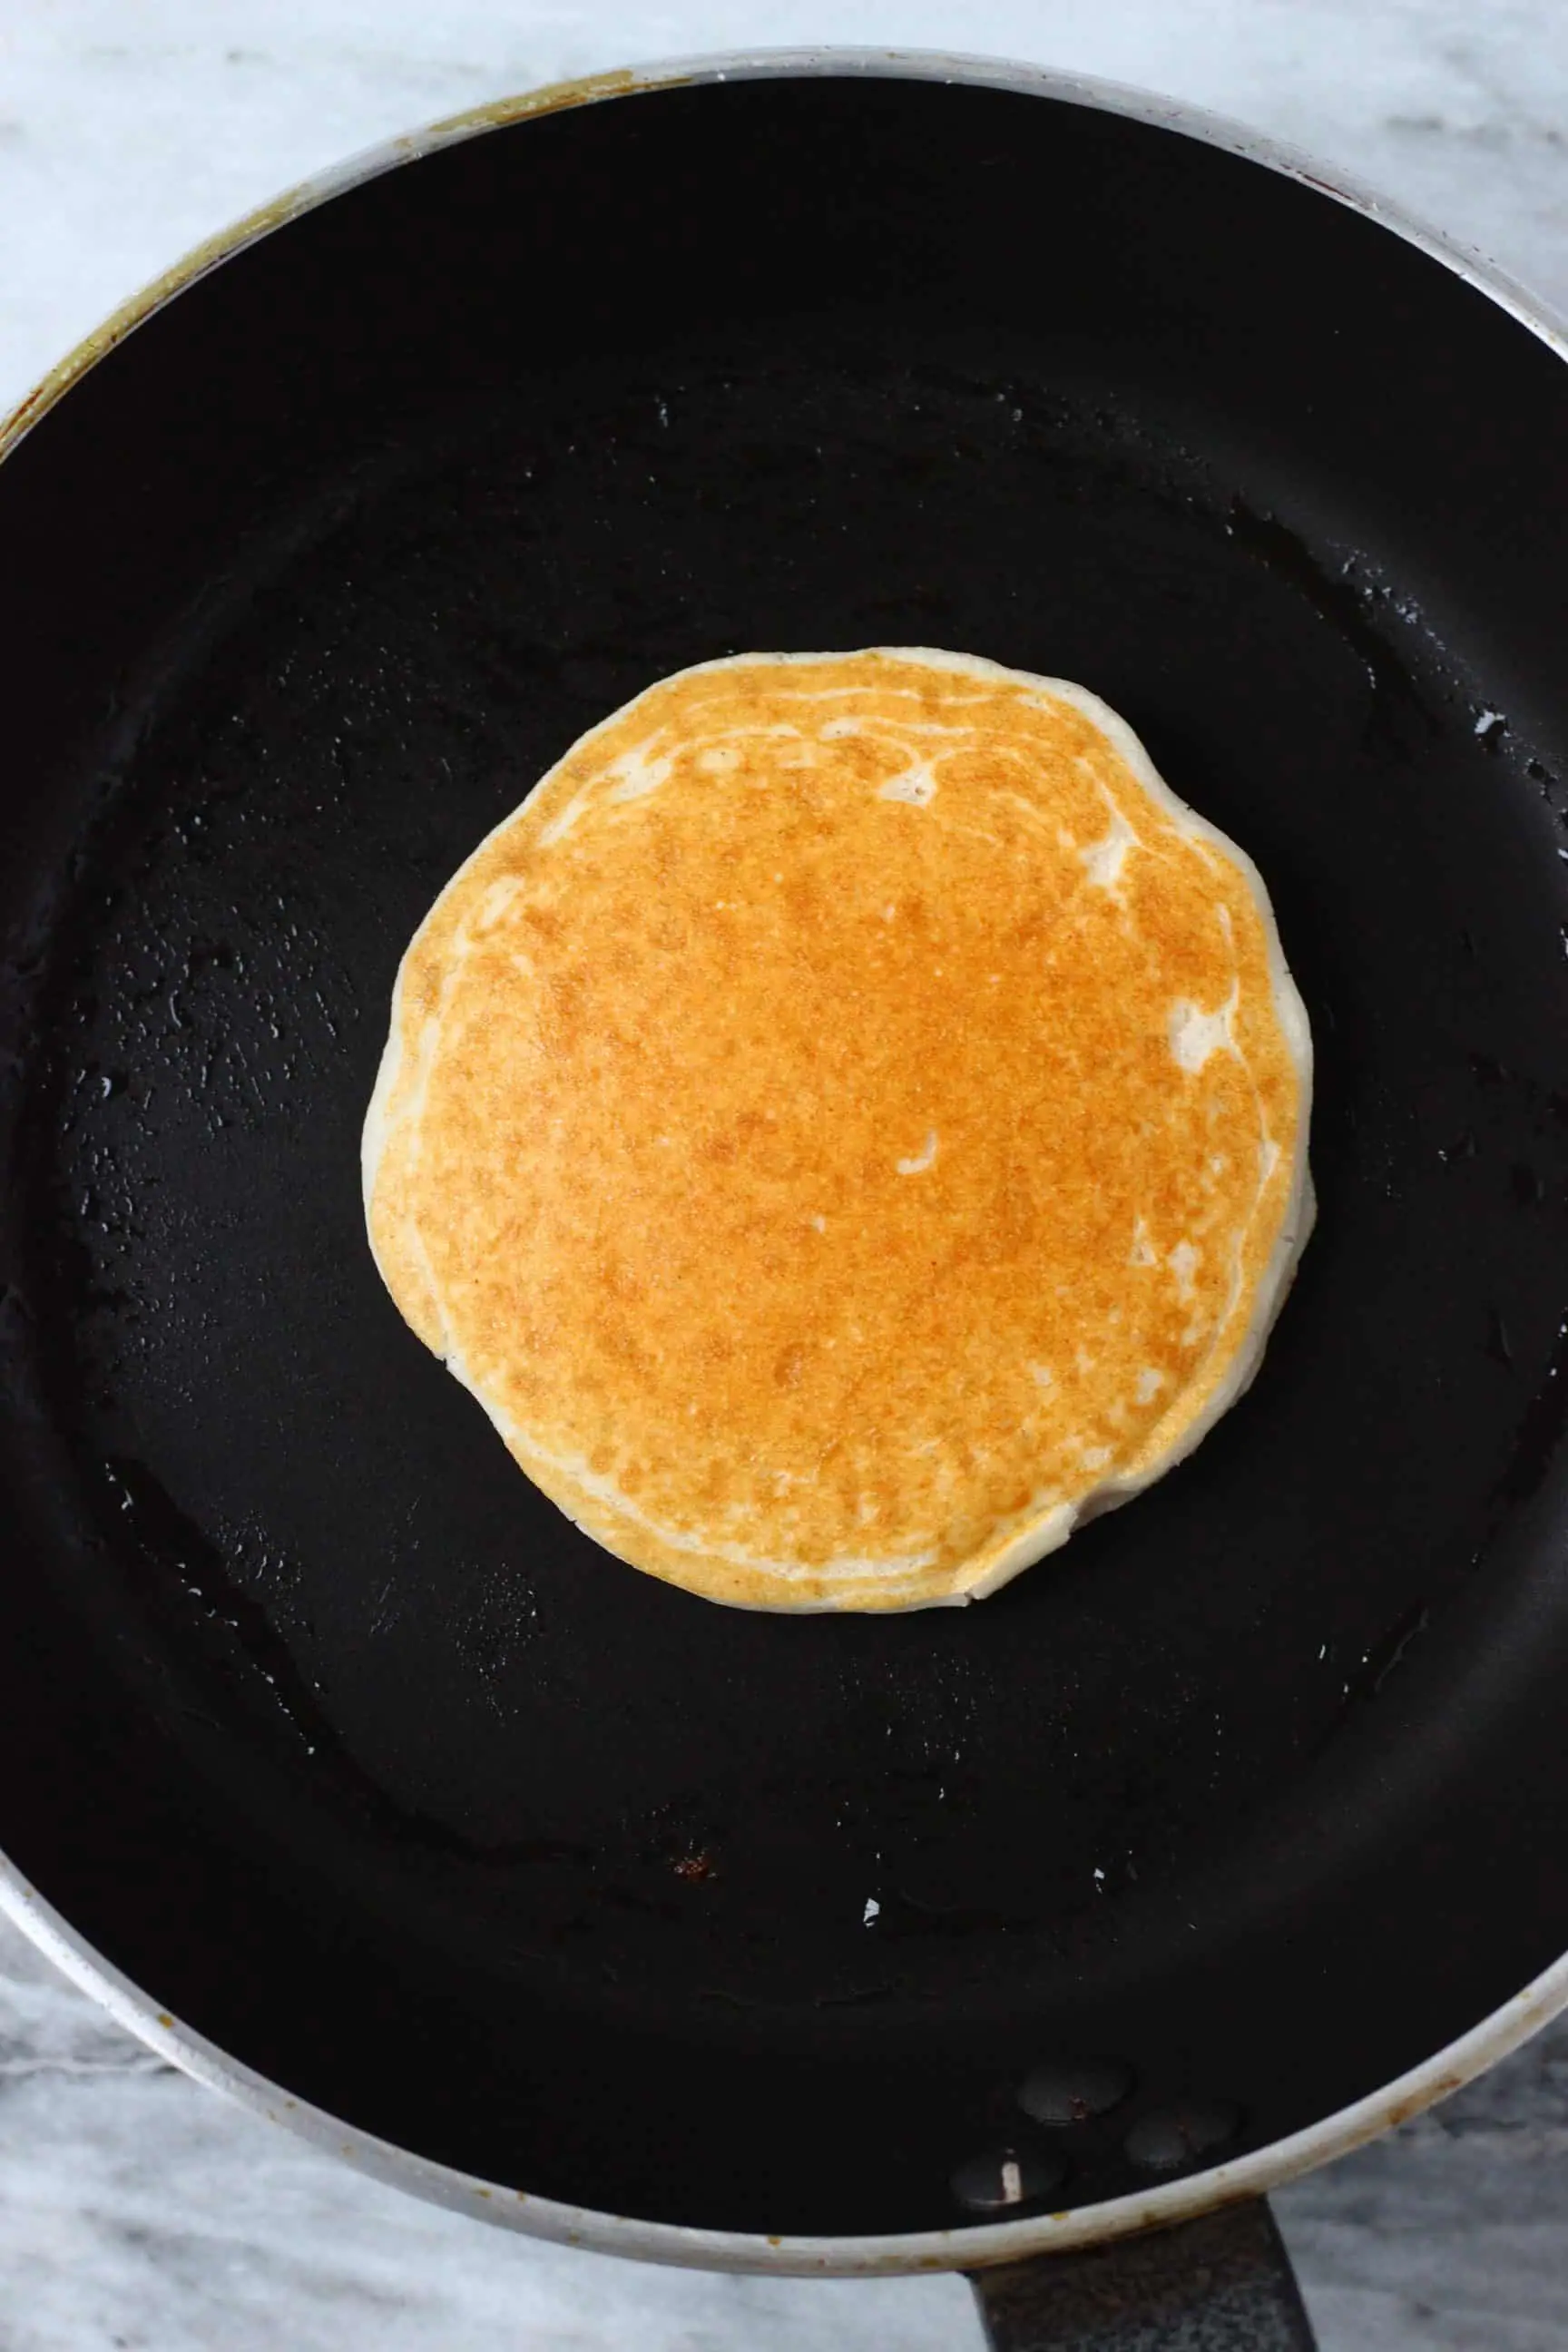 A golden brown vegan coconut flour pancake being cooked in a black frying pan 